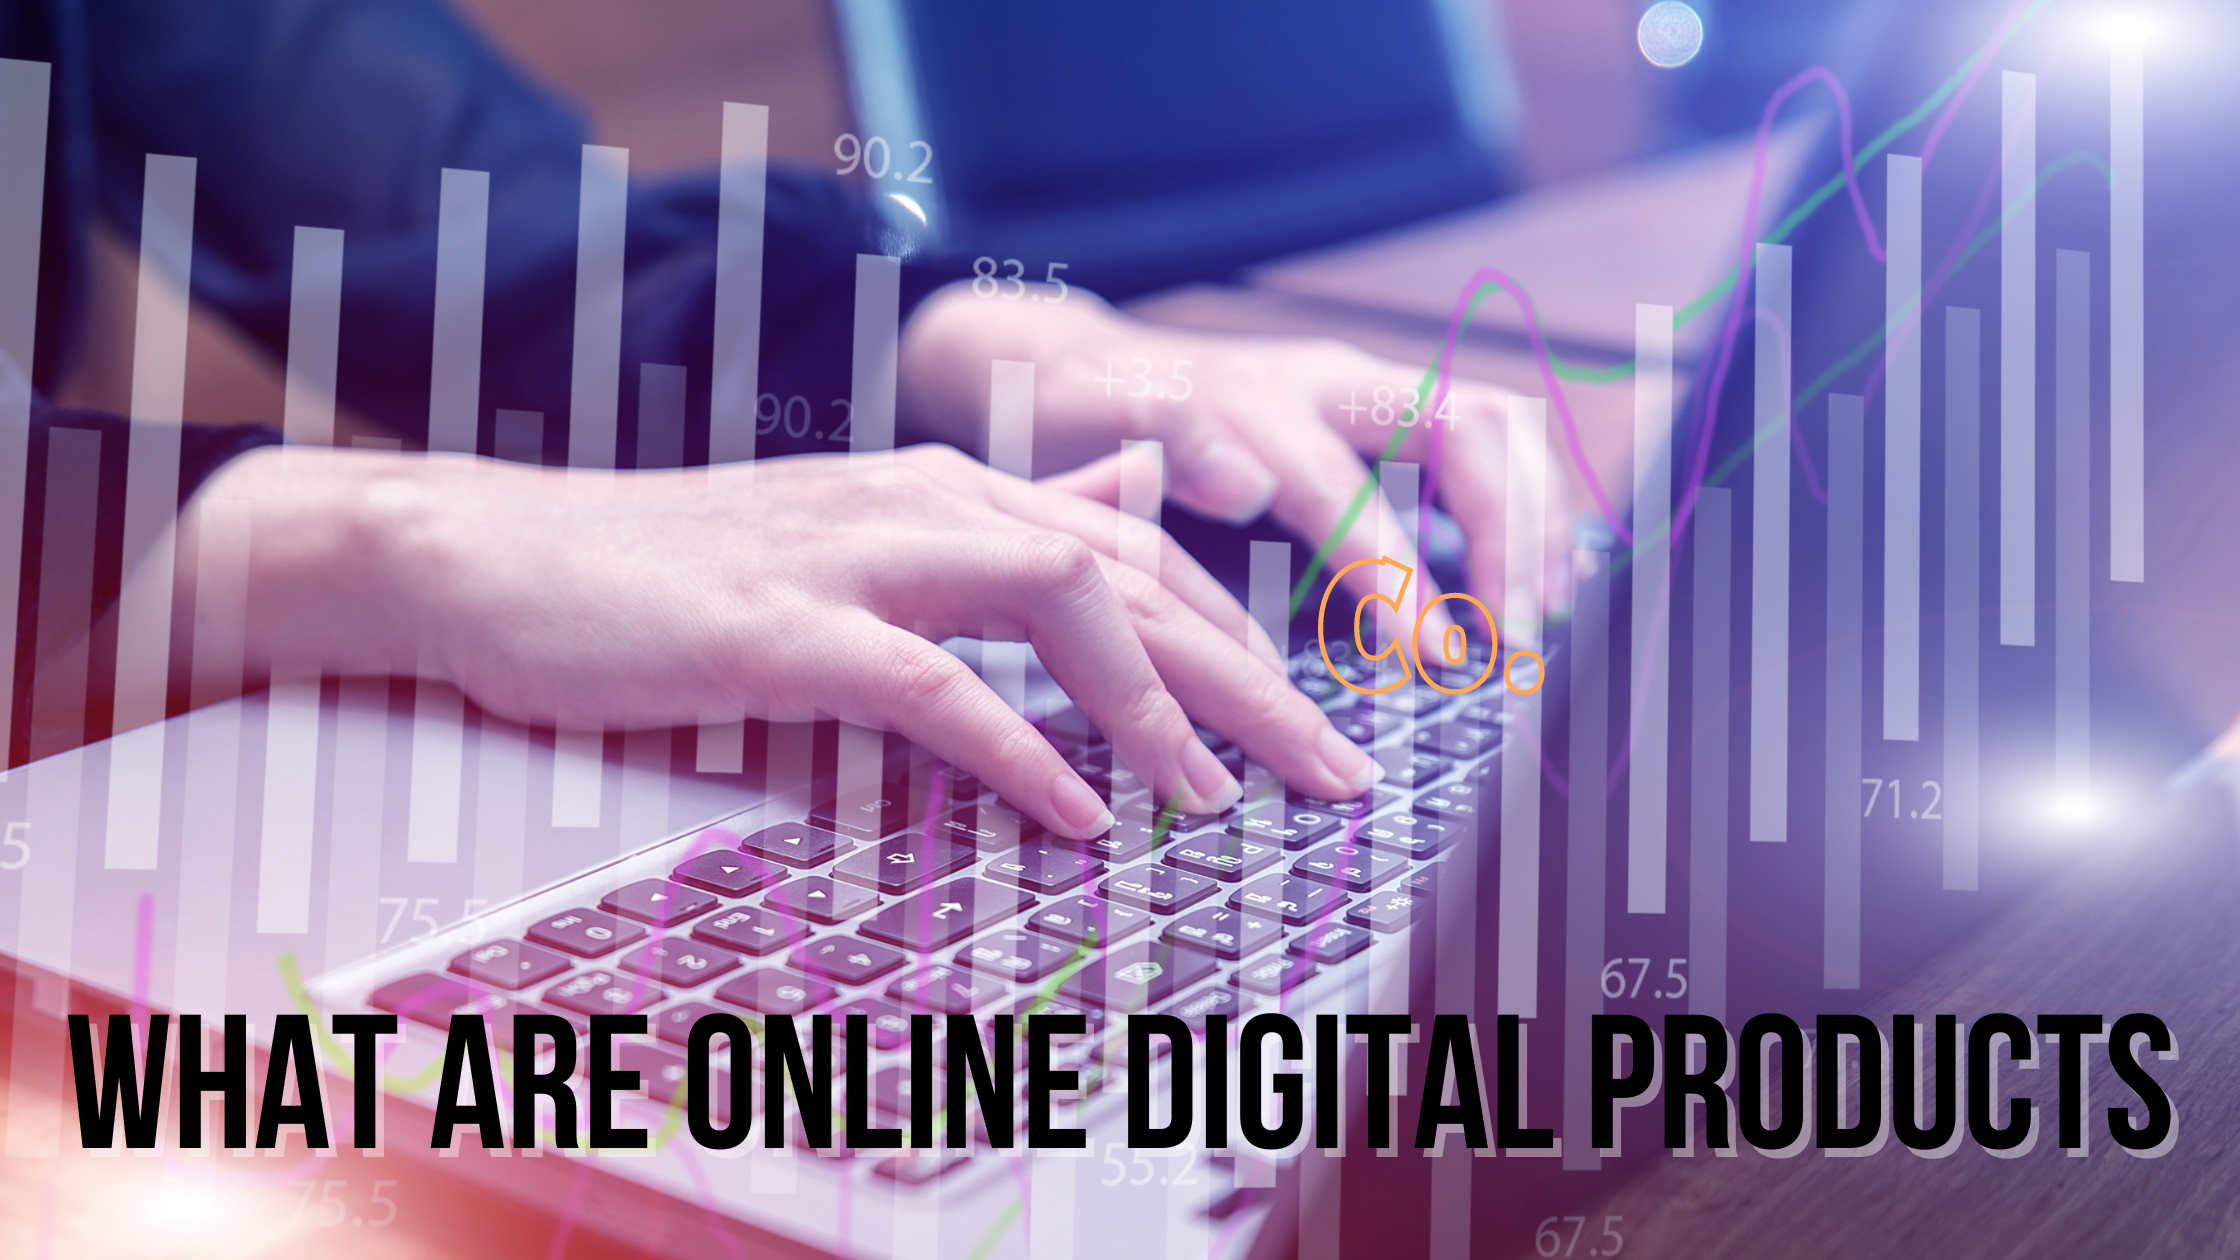 What are Online Digital Products